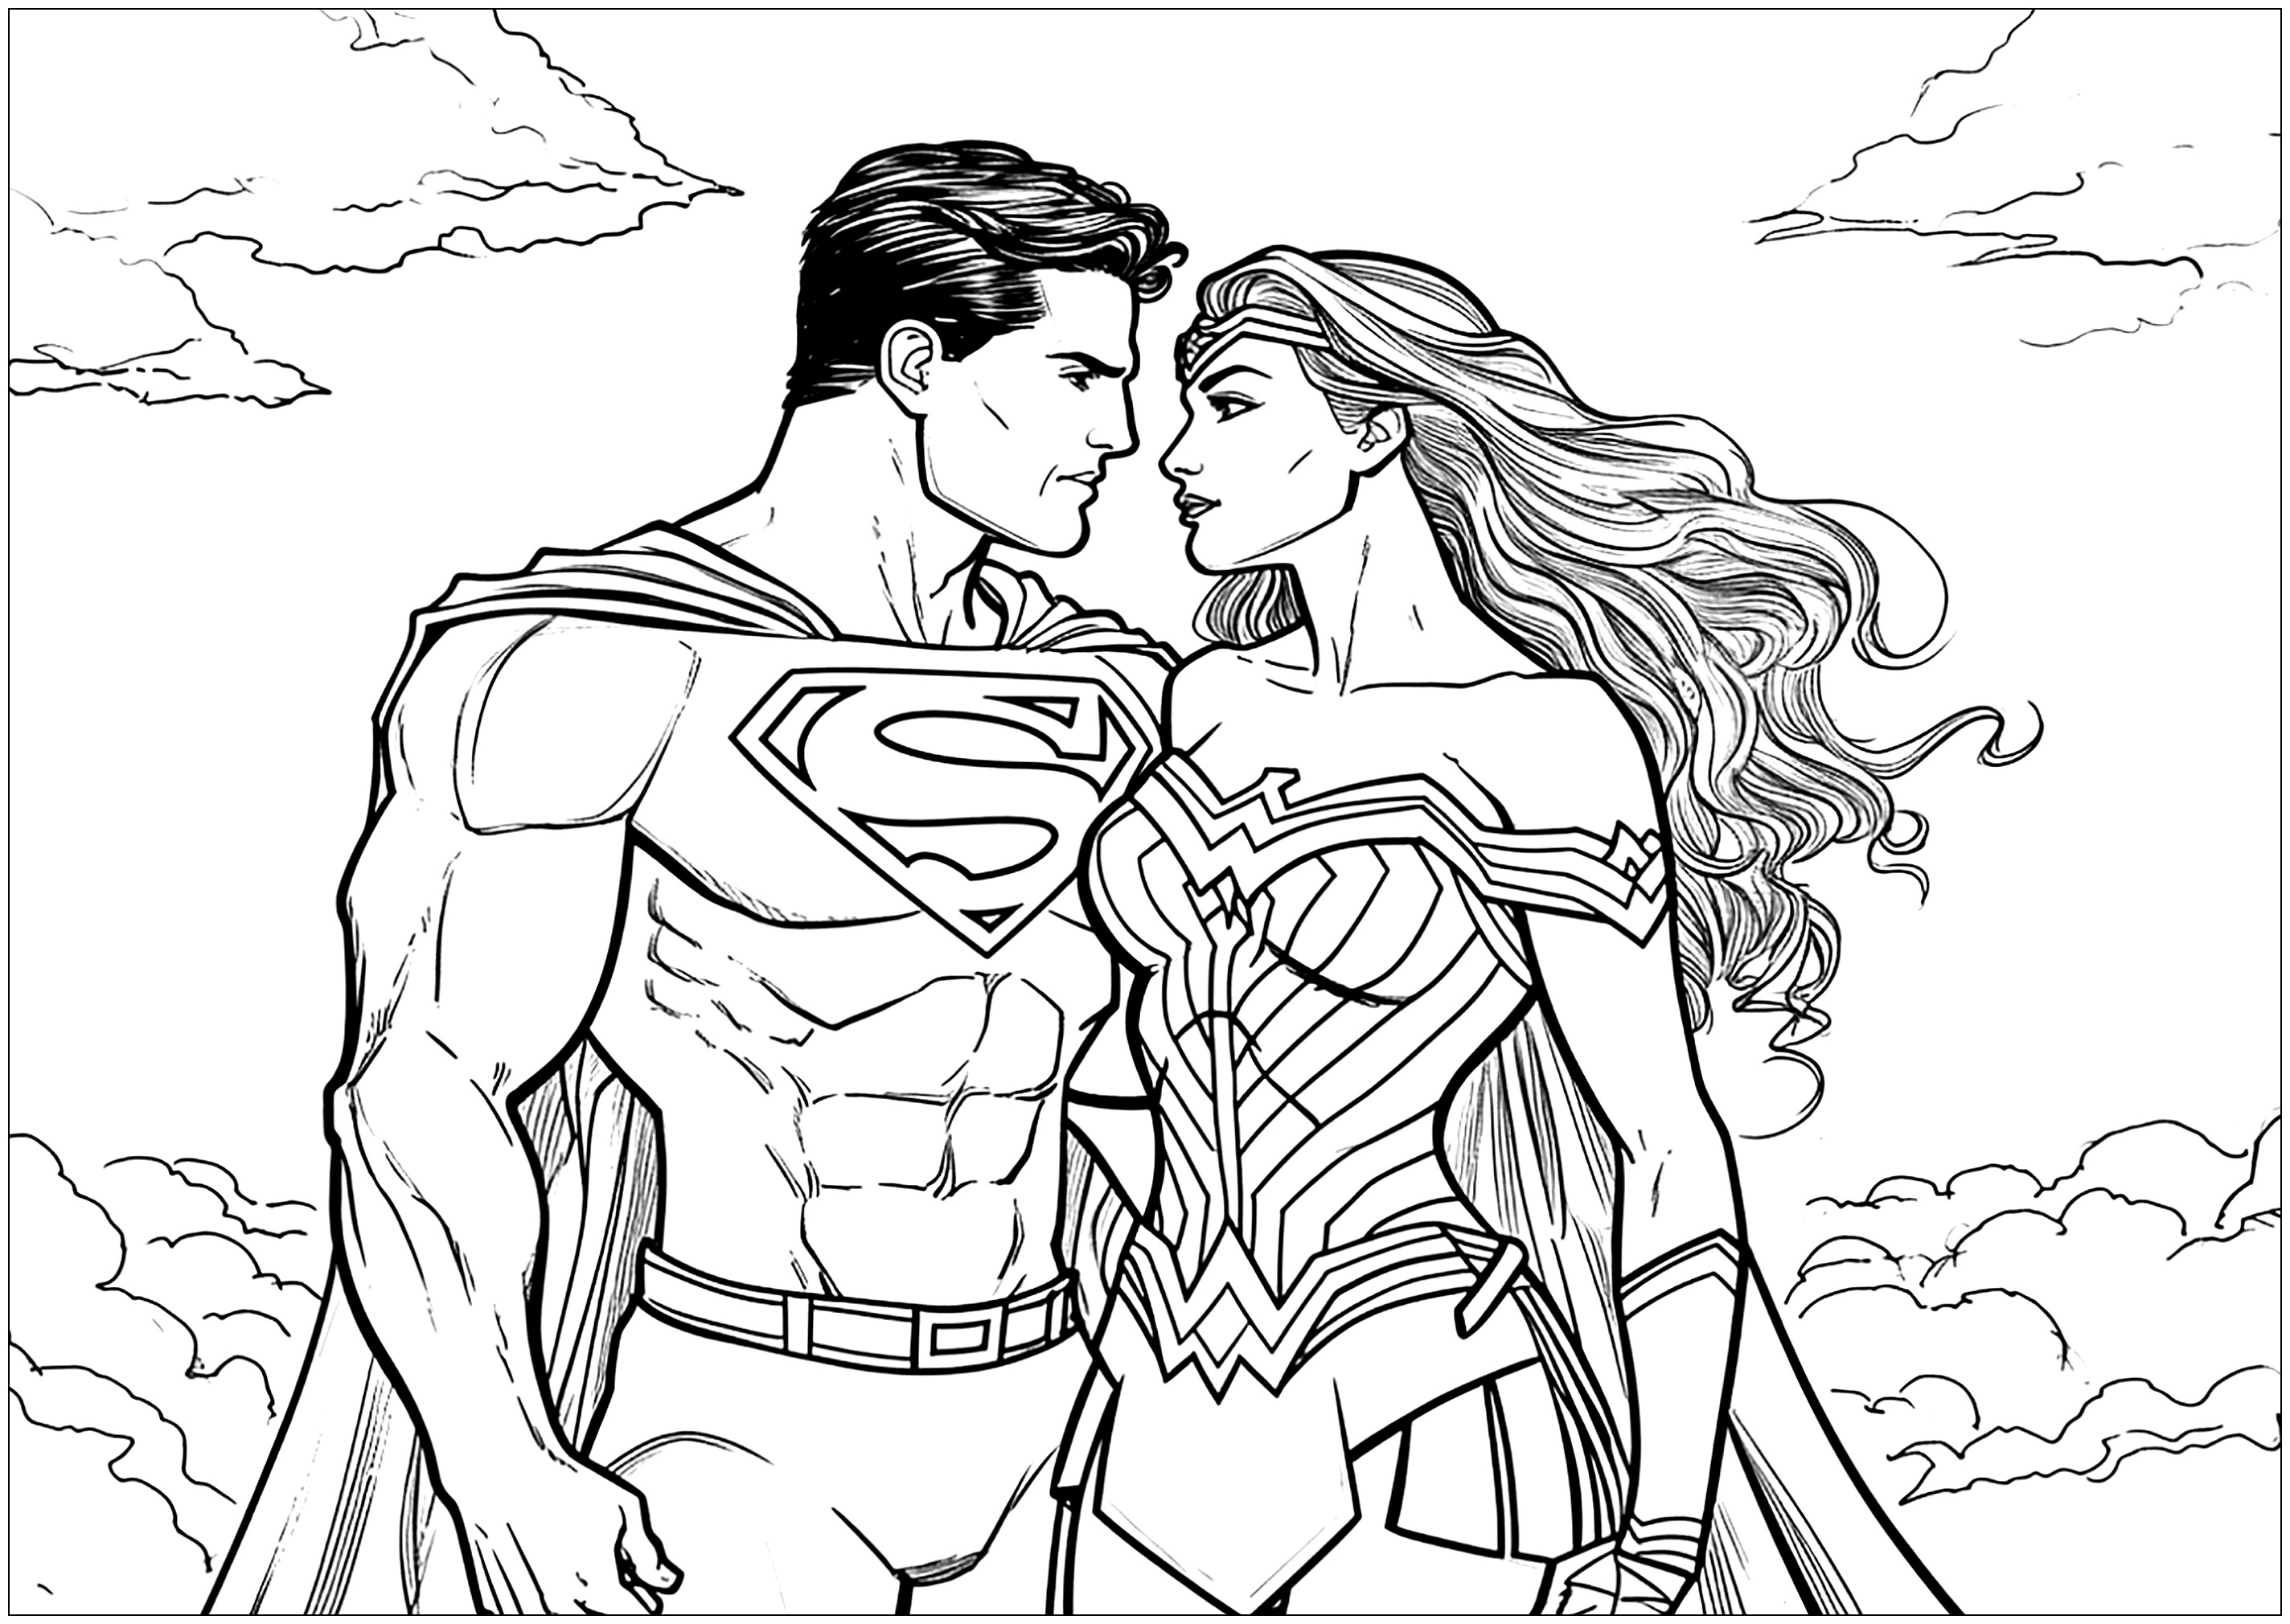 Superman and Wonder Woman in love. Even superheroes can fall in love... An original coloring page for Valentine's Day!